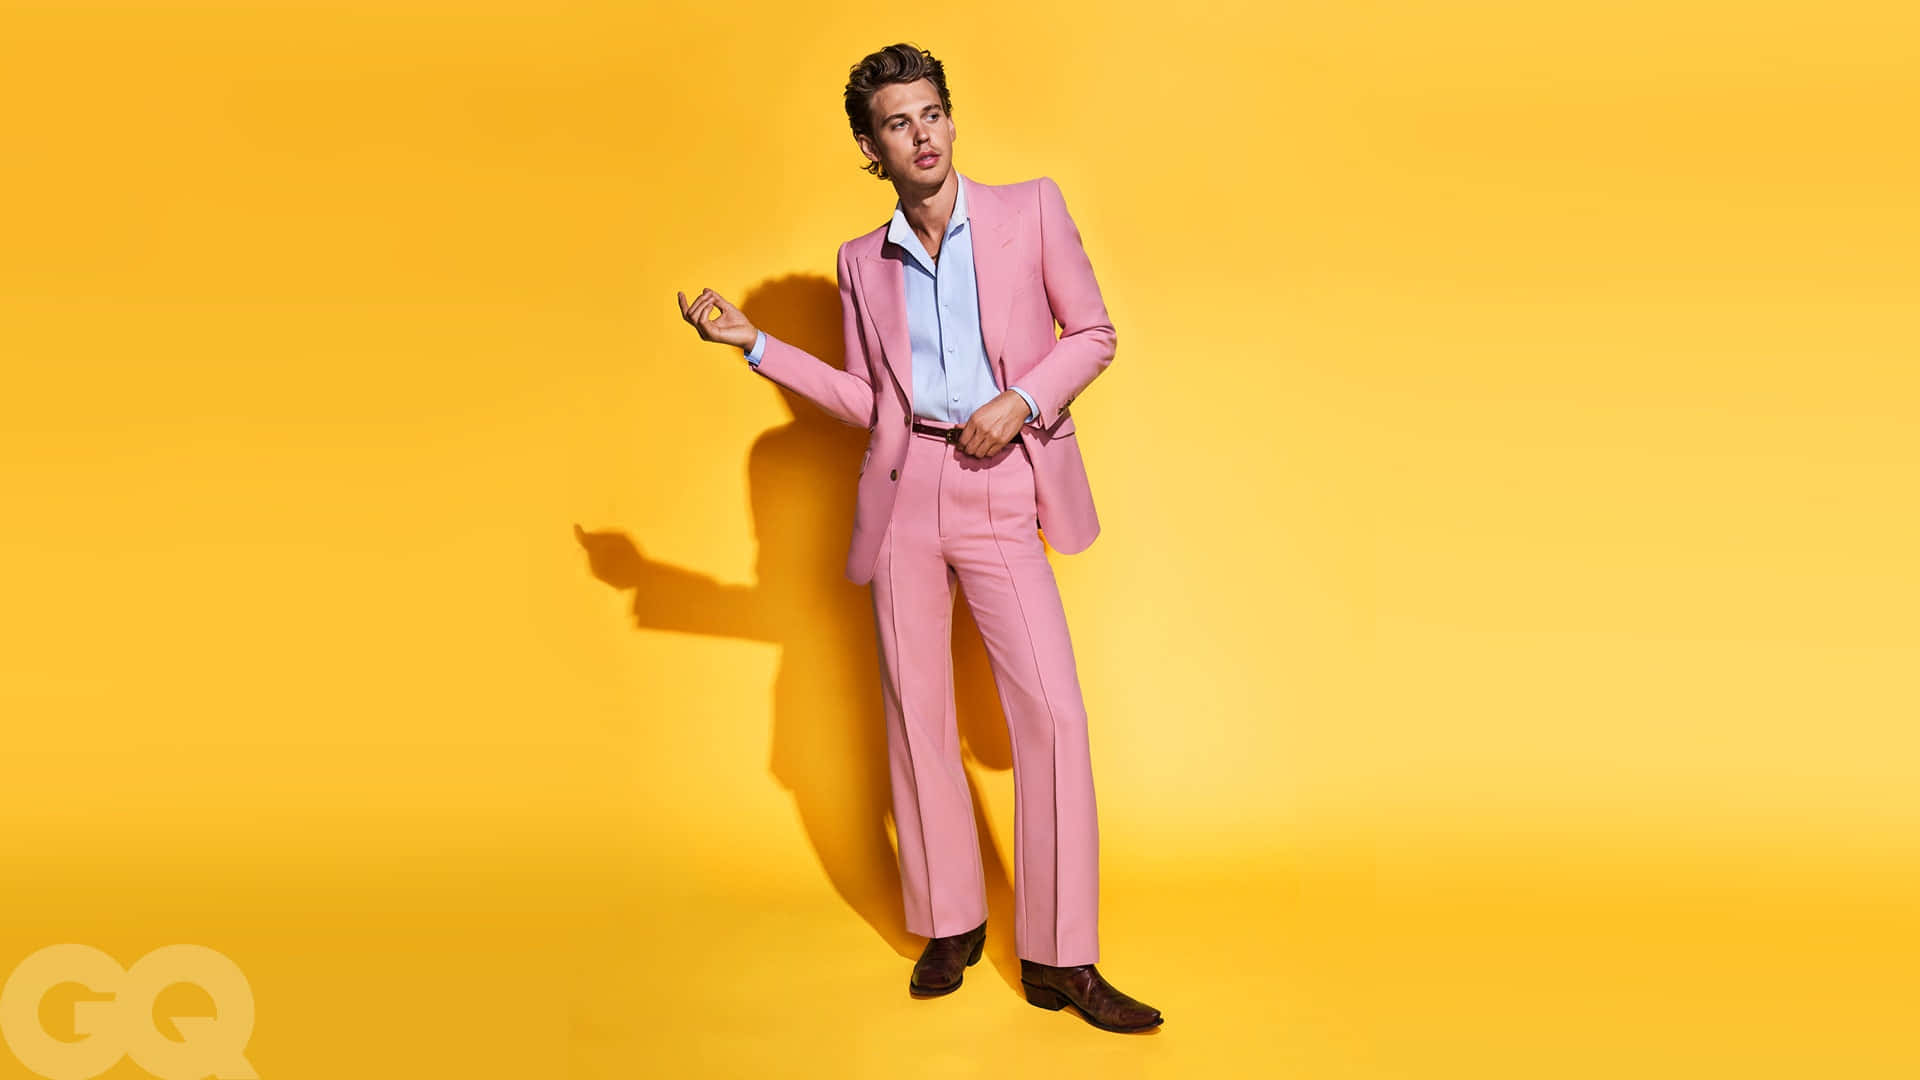 A Man In A Pink Suit Posing Against A Yellow Background Wallpaper